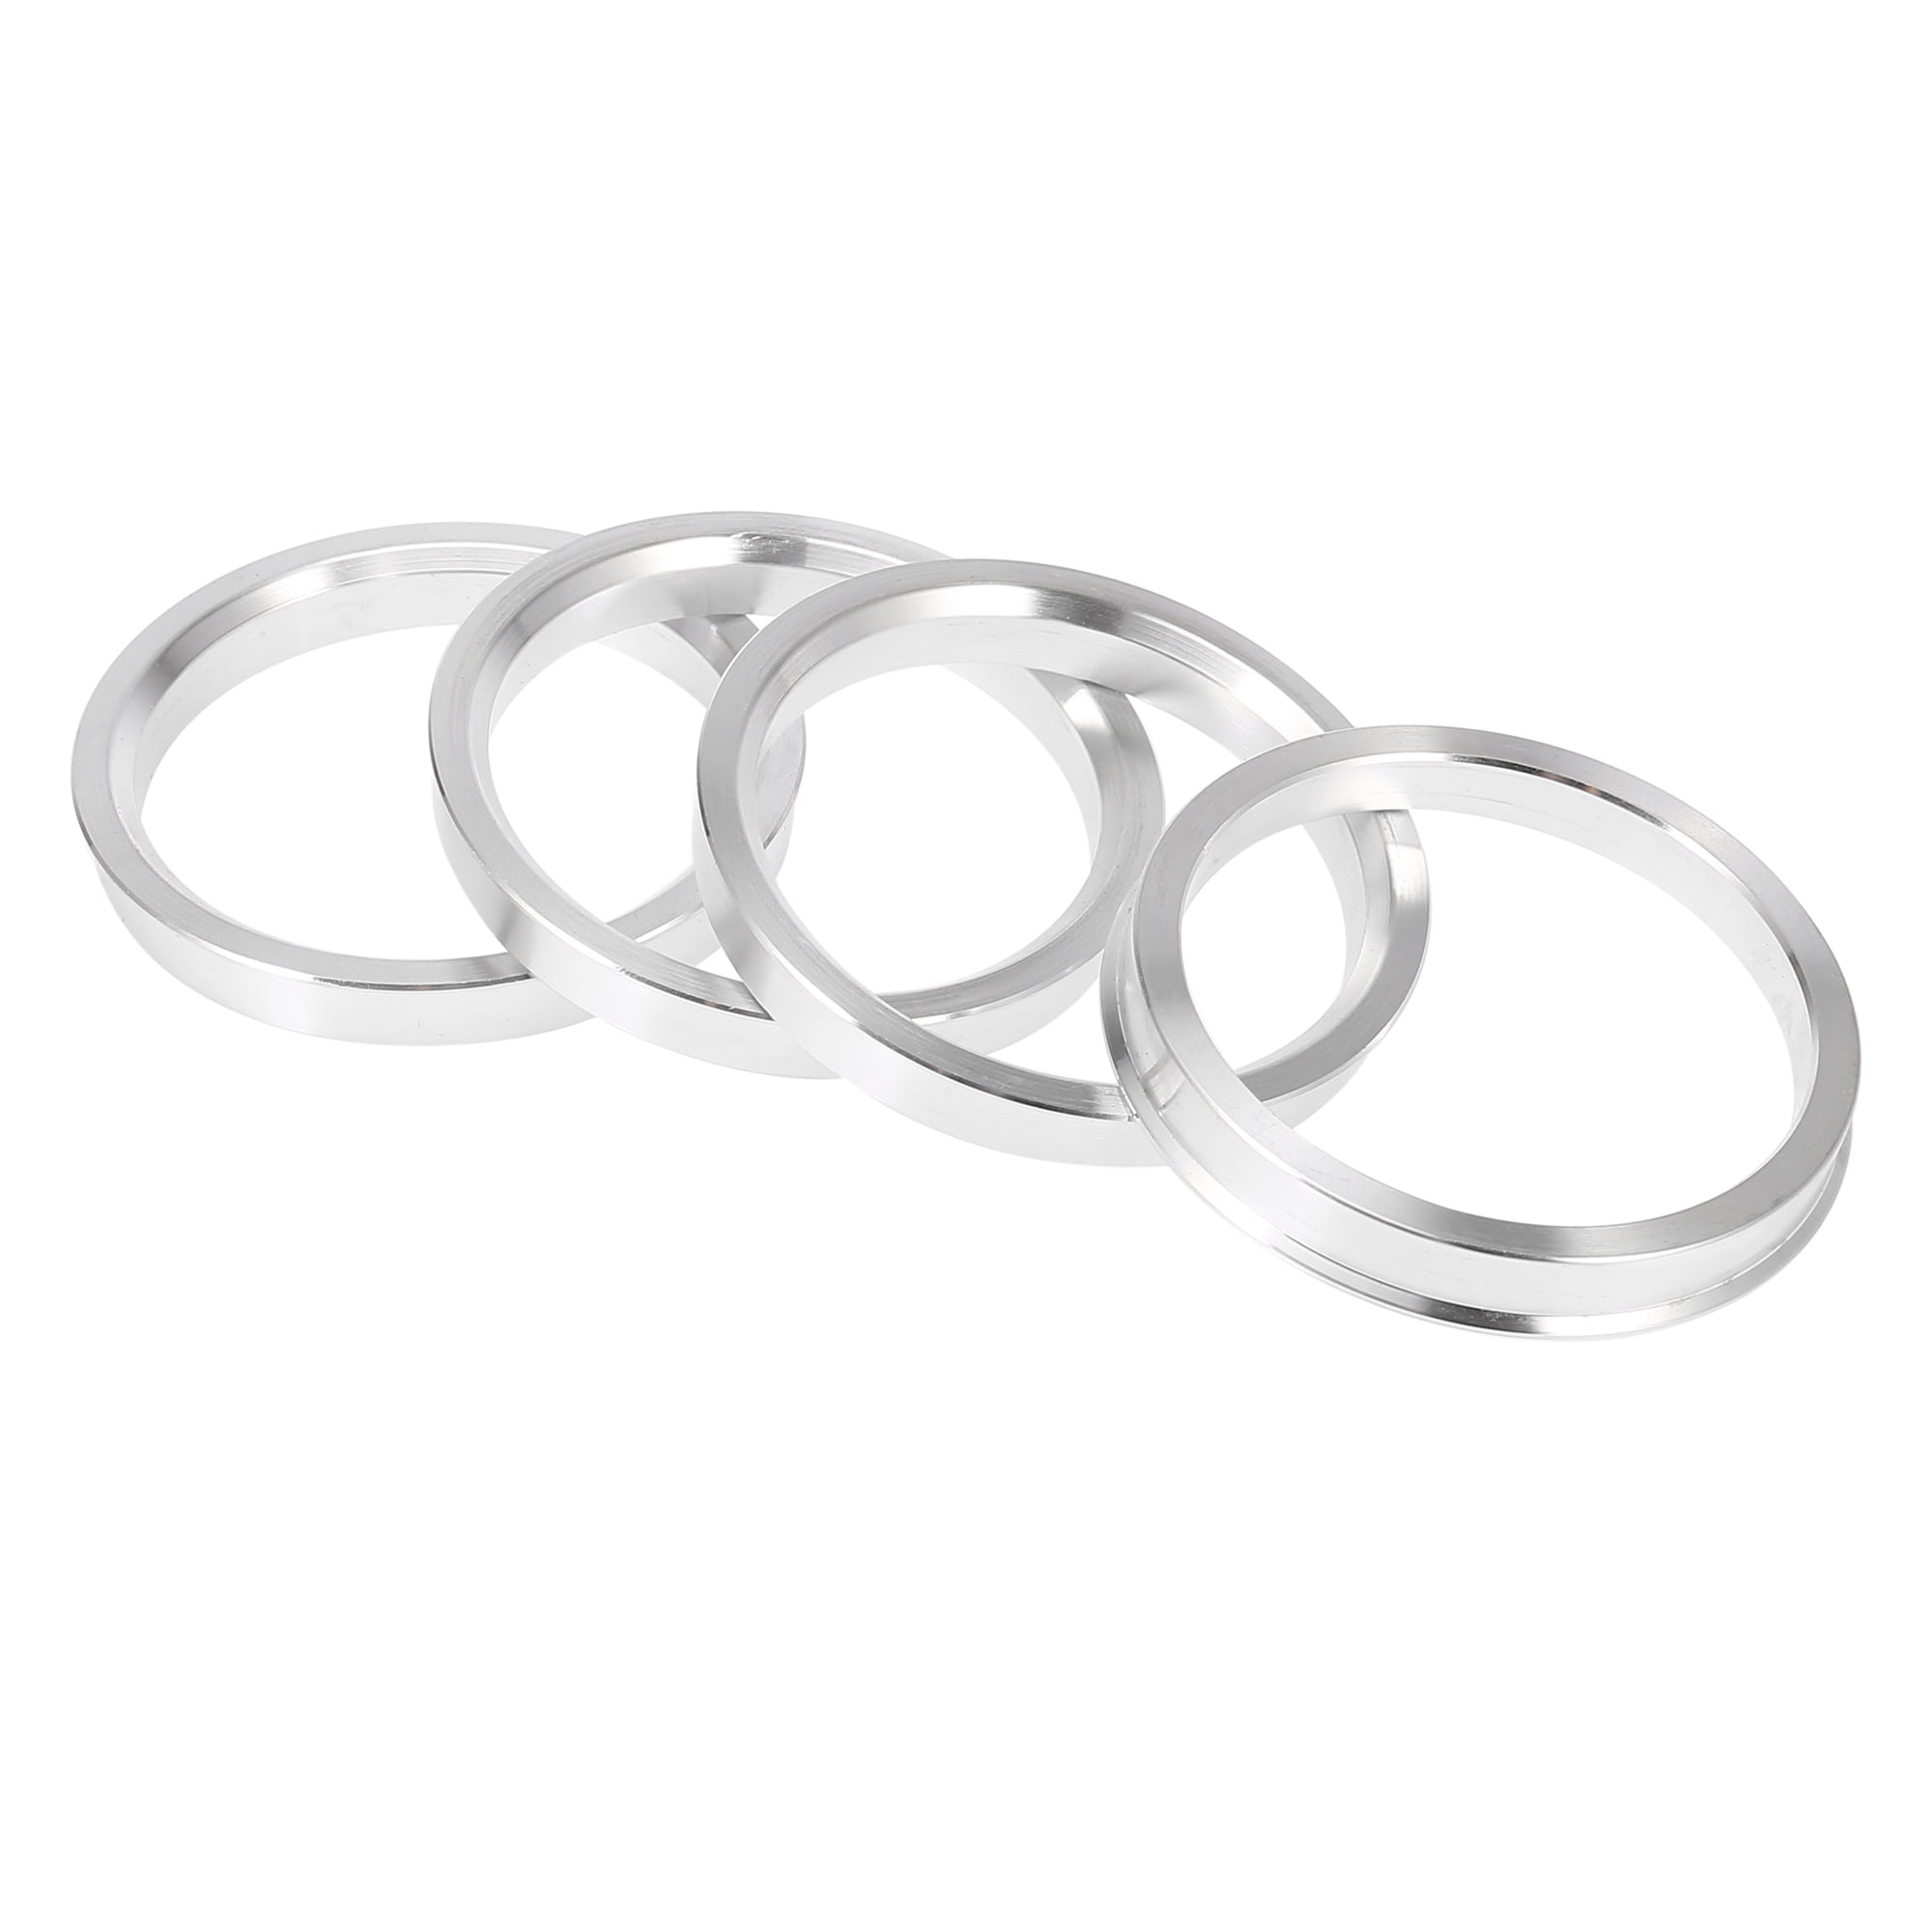 Hubcentric Rings - FastWRX.com